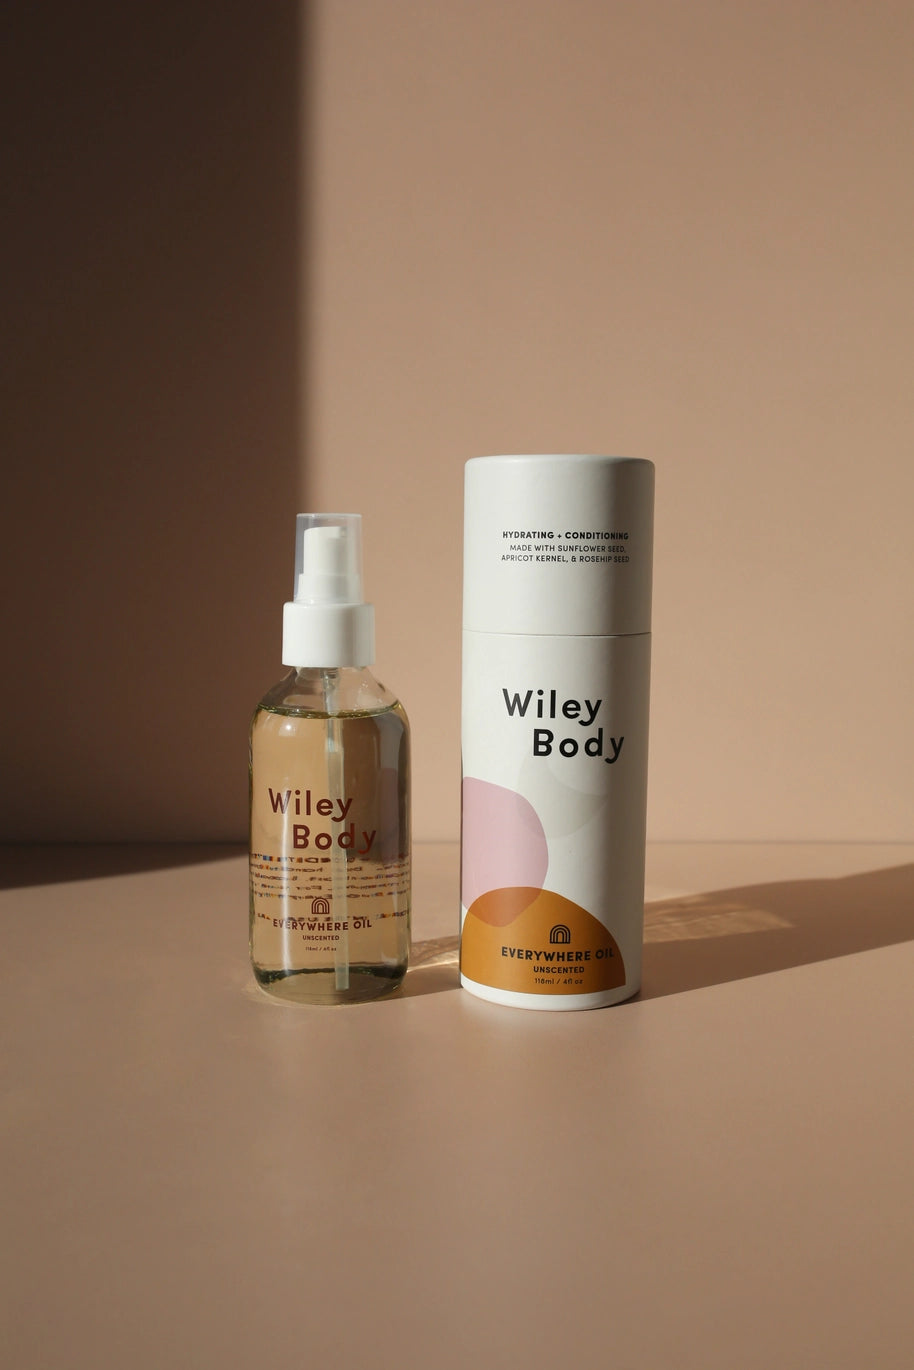 The Everywhere Oil by Wiley Body